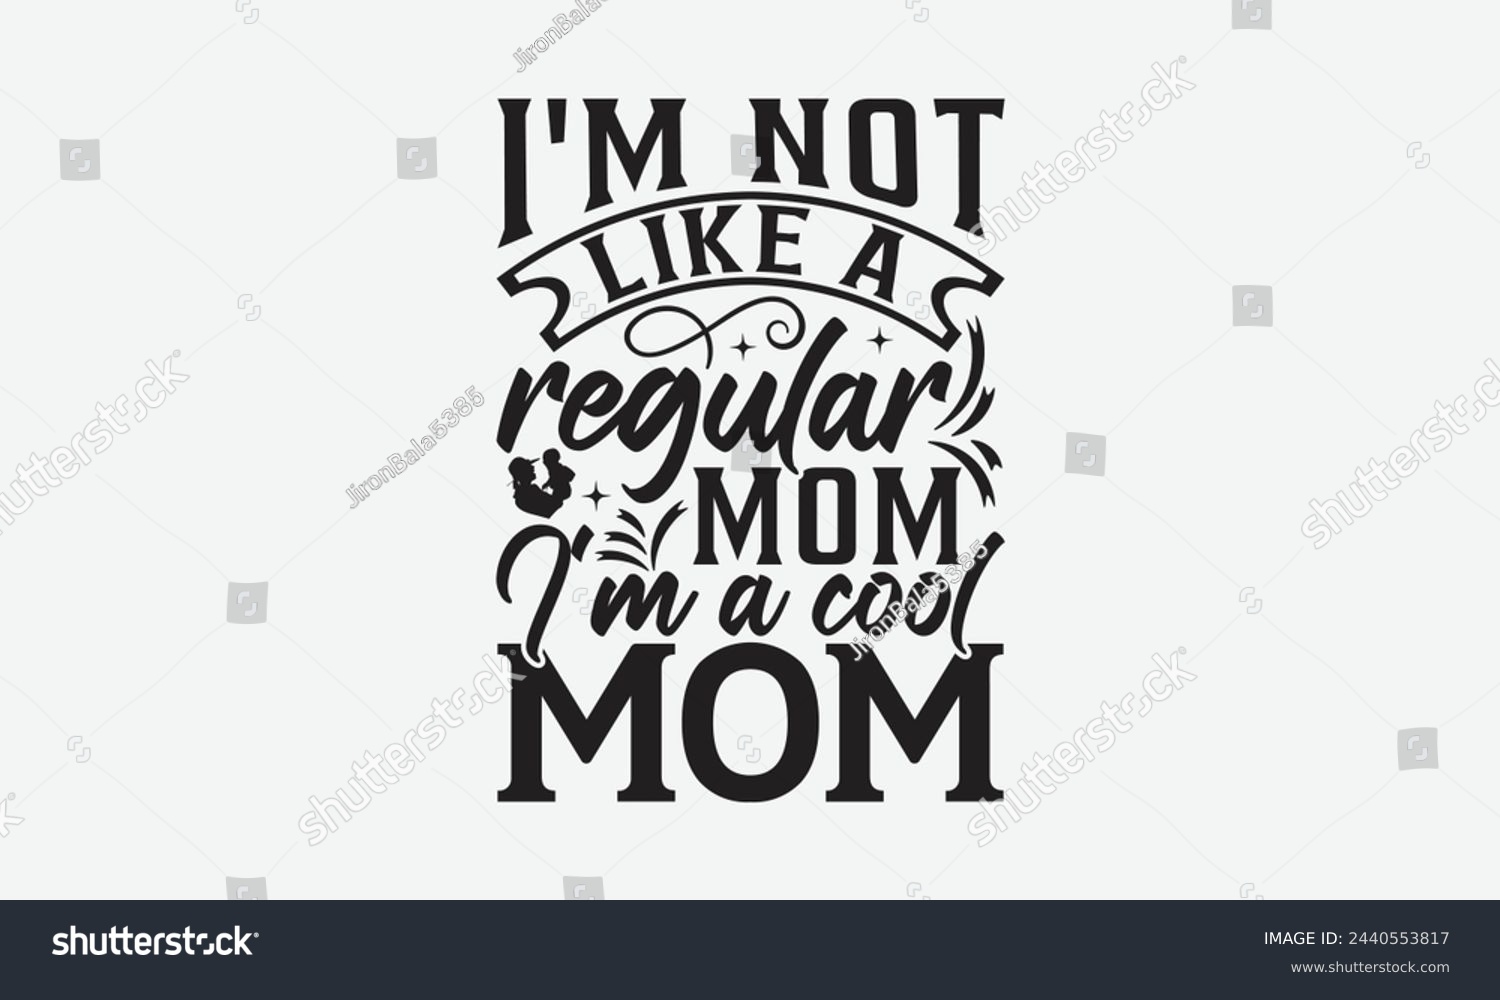 SVG of I'm not like a regular mom I'm a cool mom - Mom t-shirt design, isolated on white background, this illustration can be used as a print on t-shirts and bags, cover book, template, stationary or as a po svg